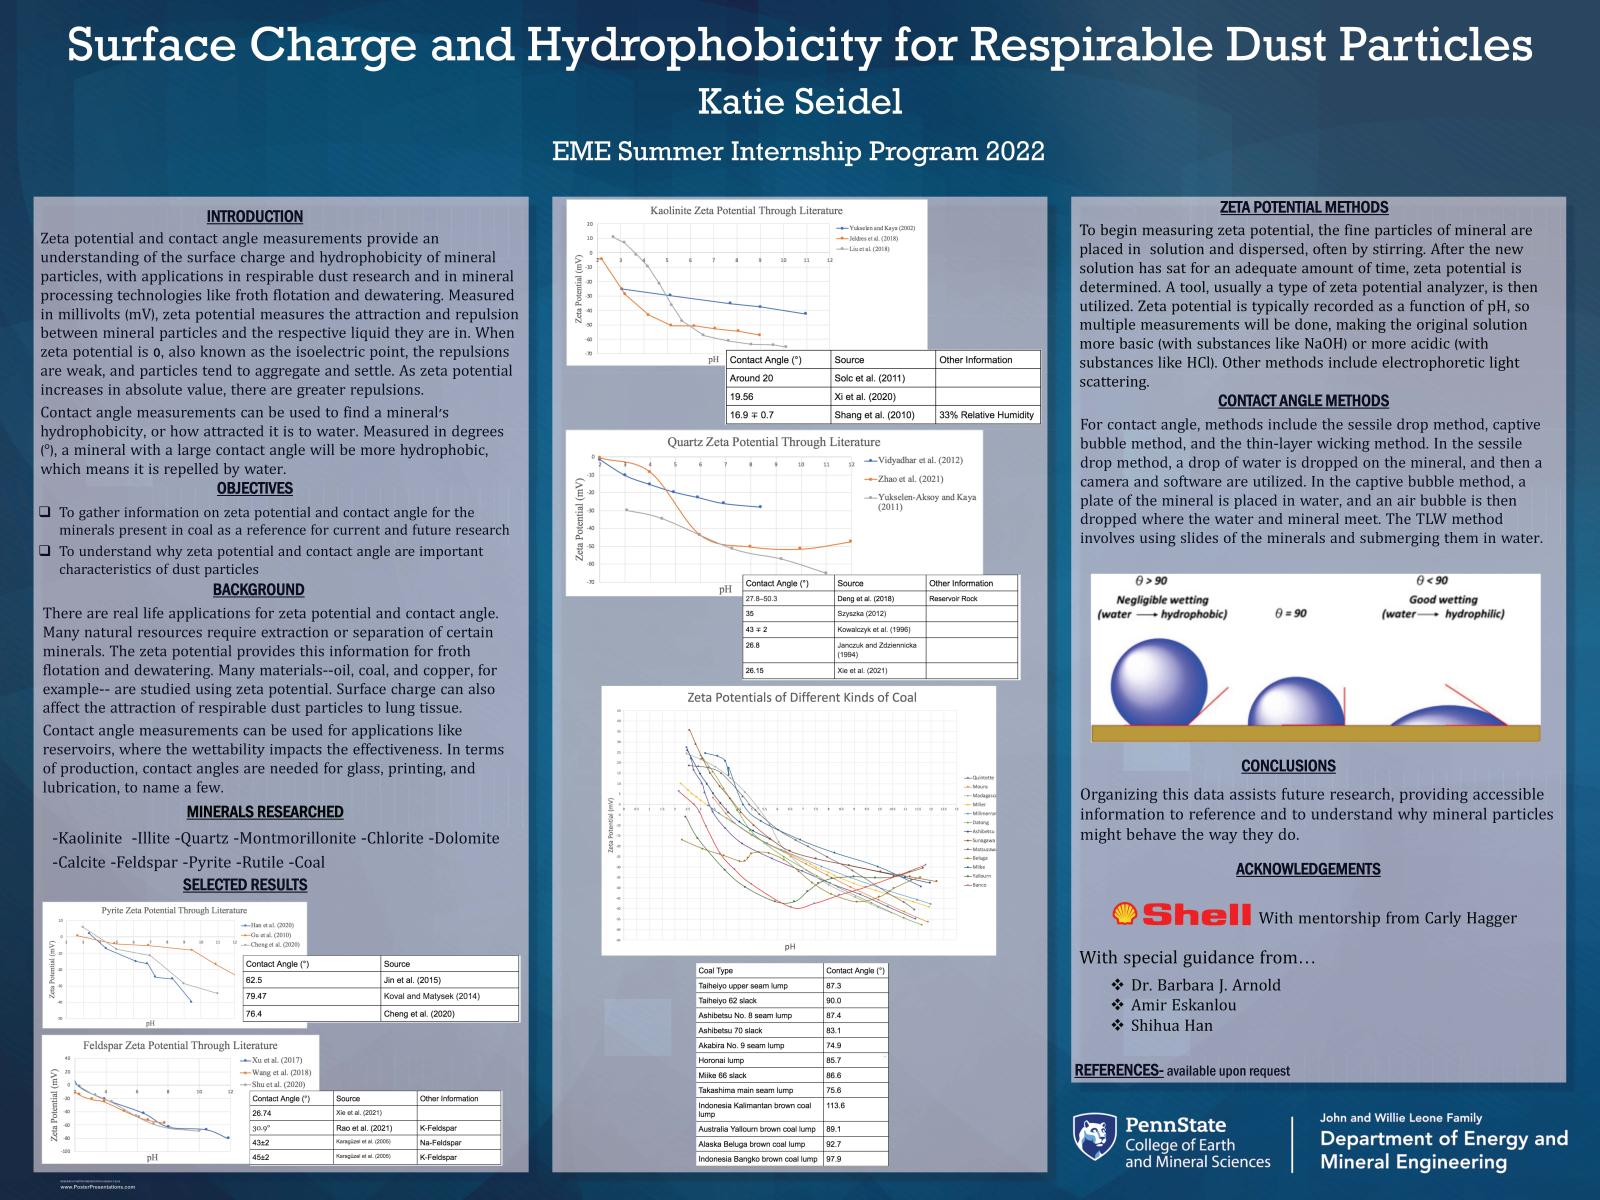 Katie Seidel Research Poster